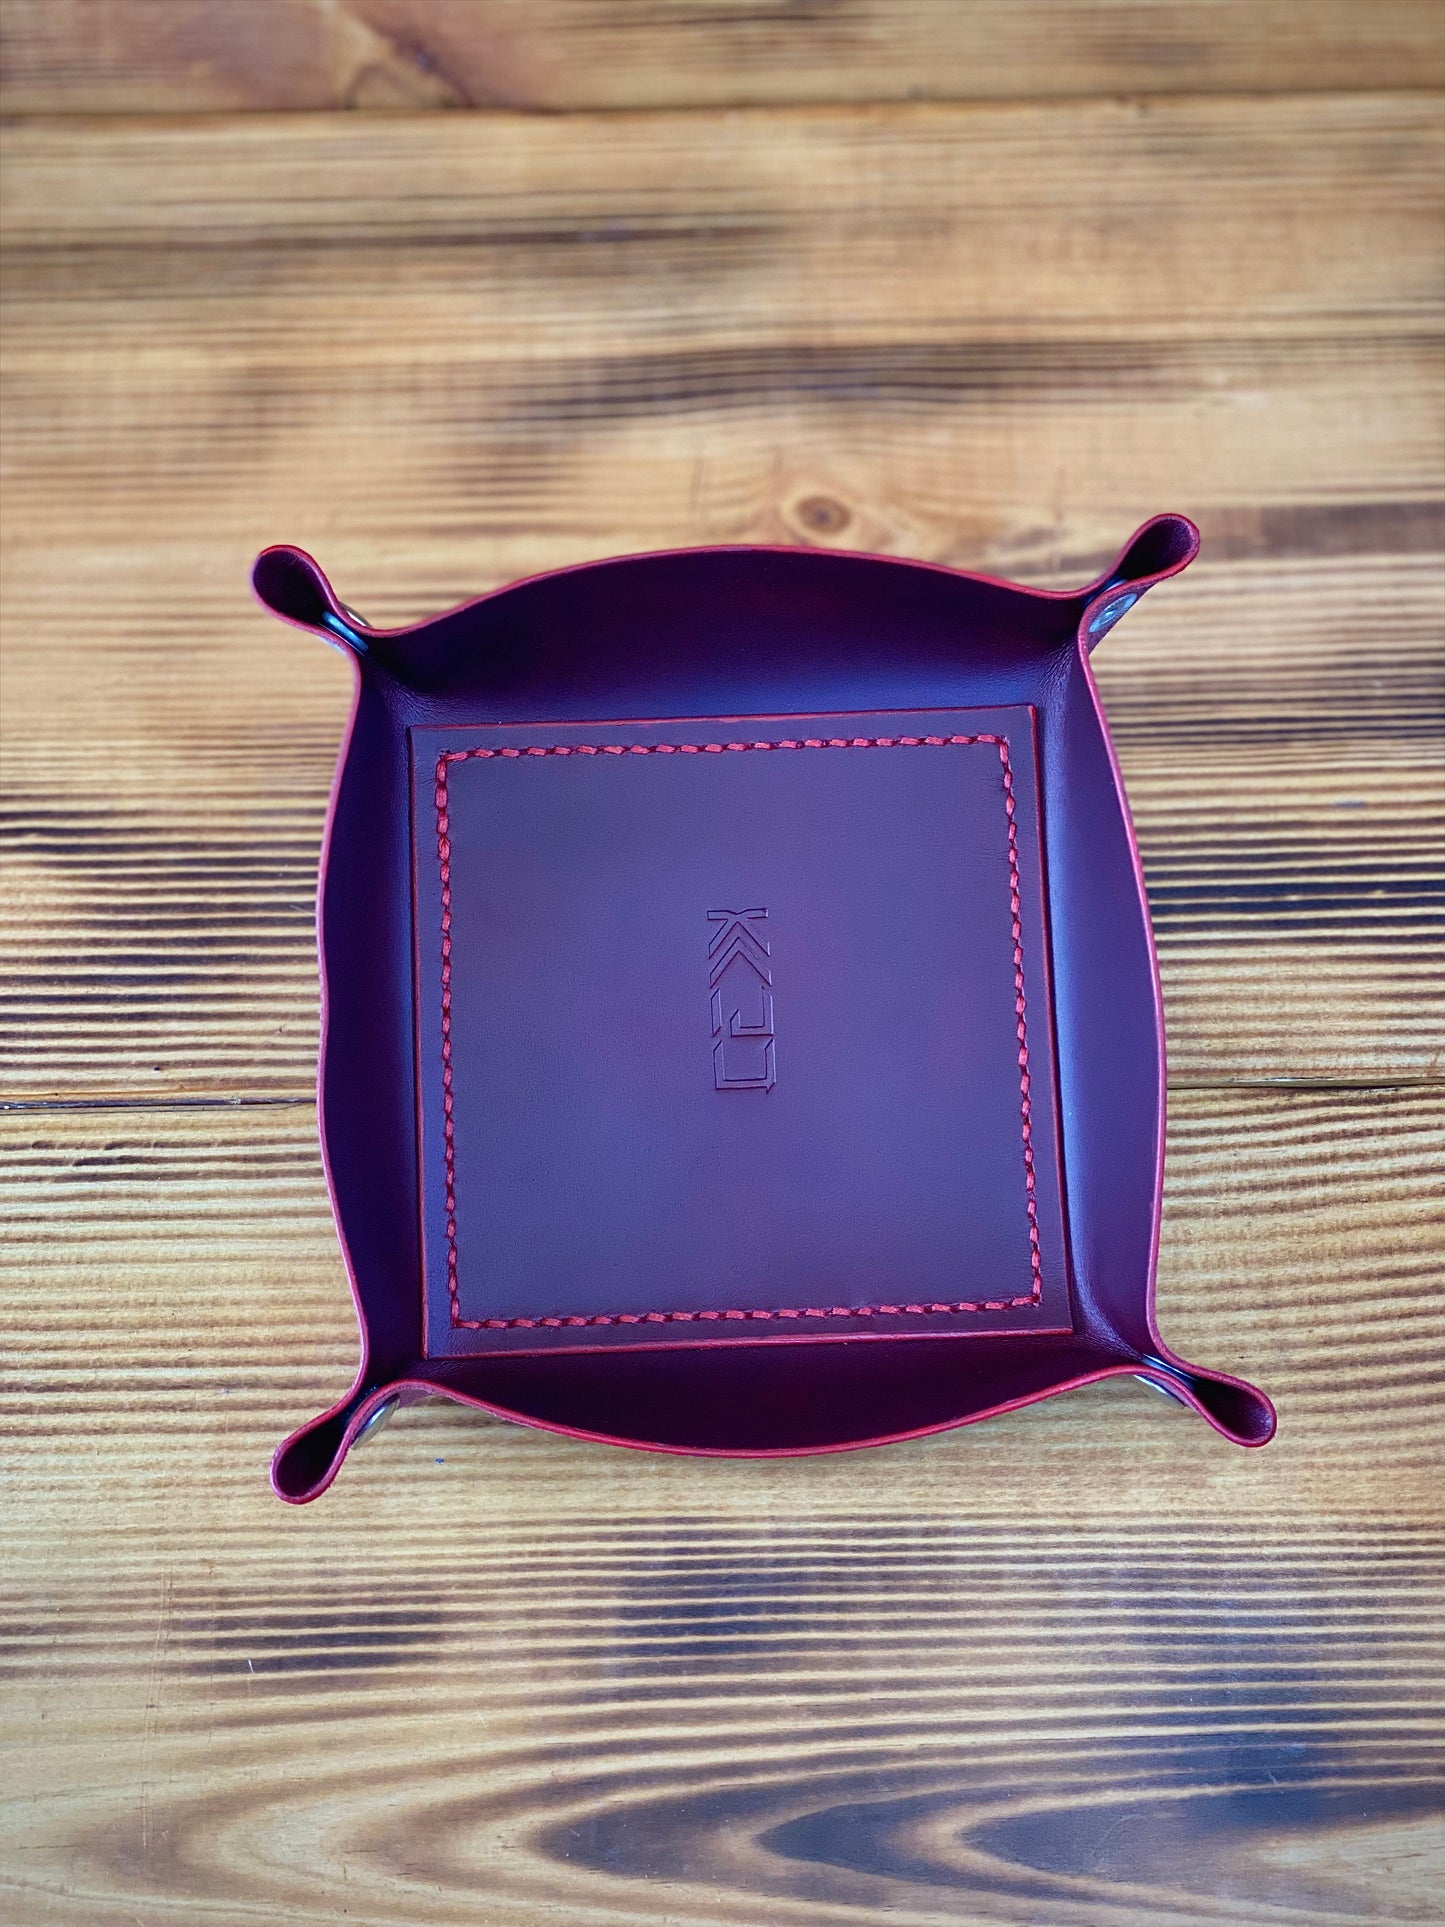 Kaiju Cut and Sew Handmade Leather Catch All | Dice Tray | Made in Austin, Texas | Crimson Horween Leather